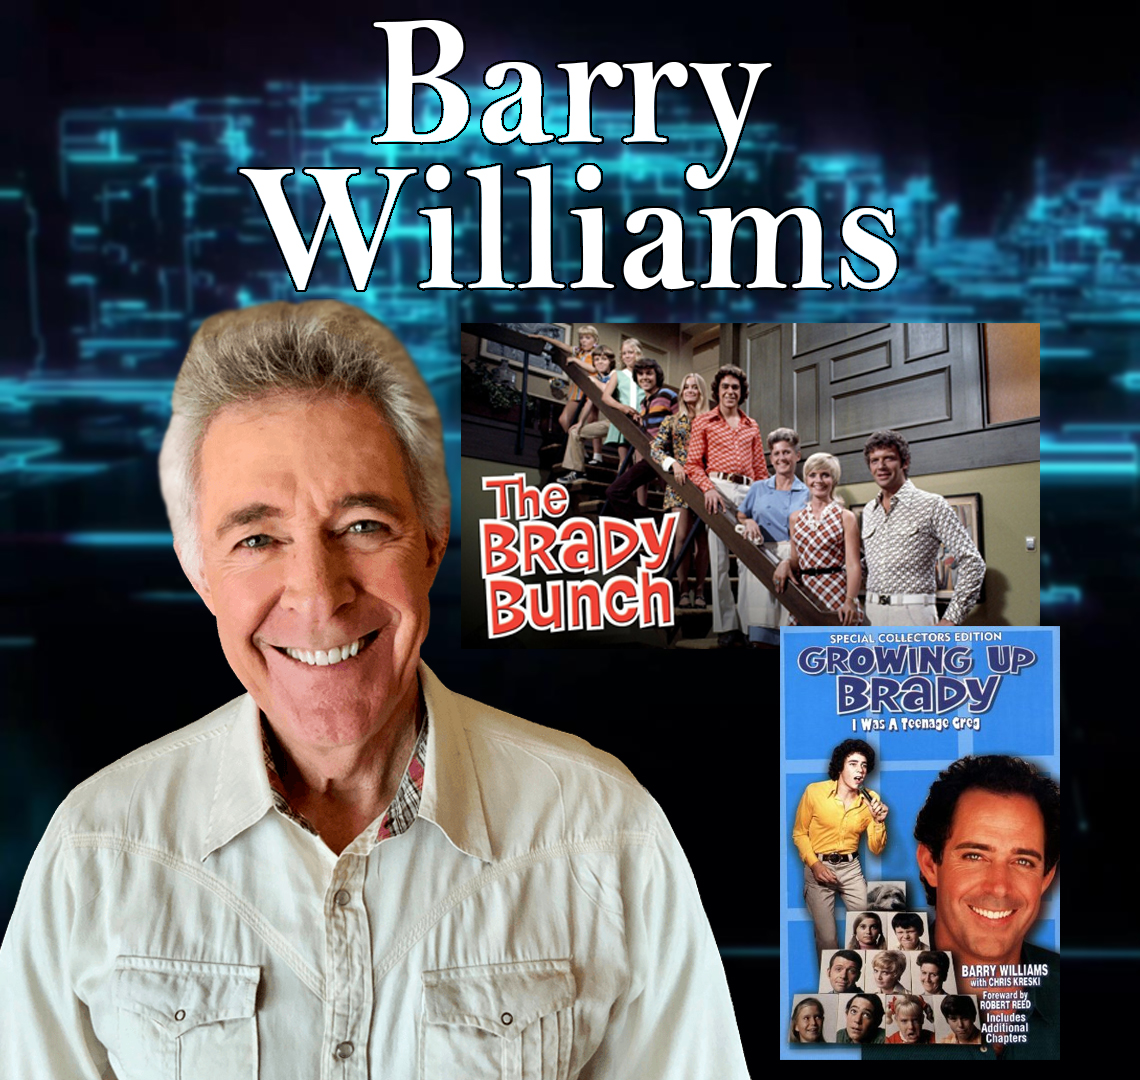 Barry Williams Guests On Harvey Brownstone Interviews